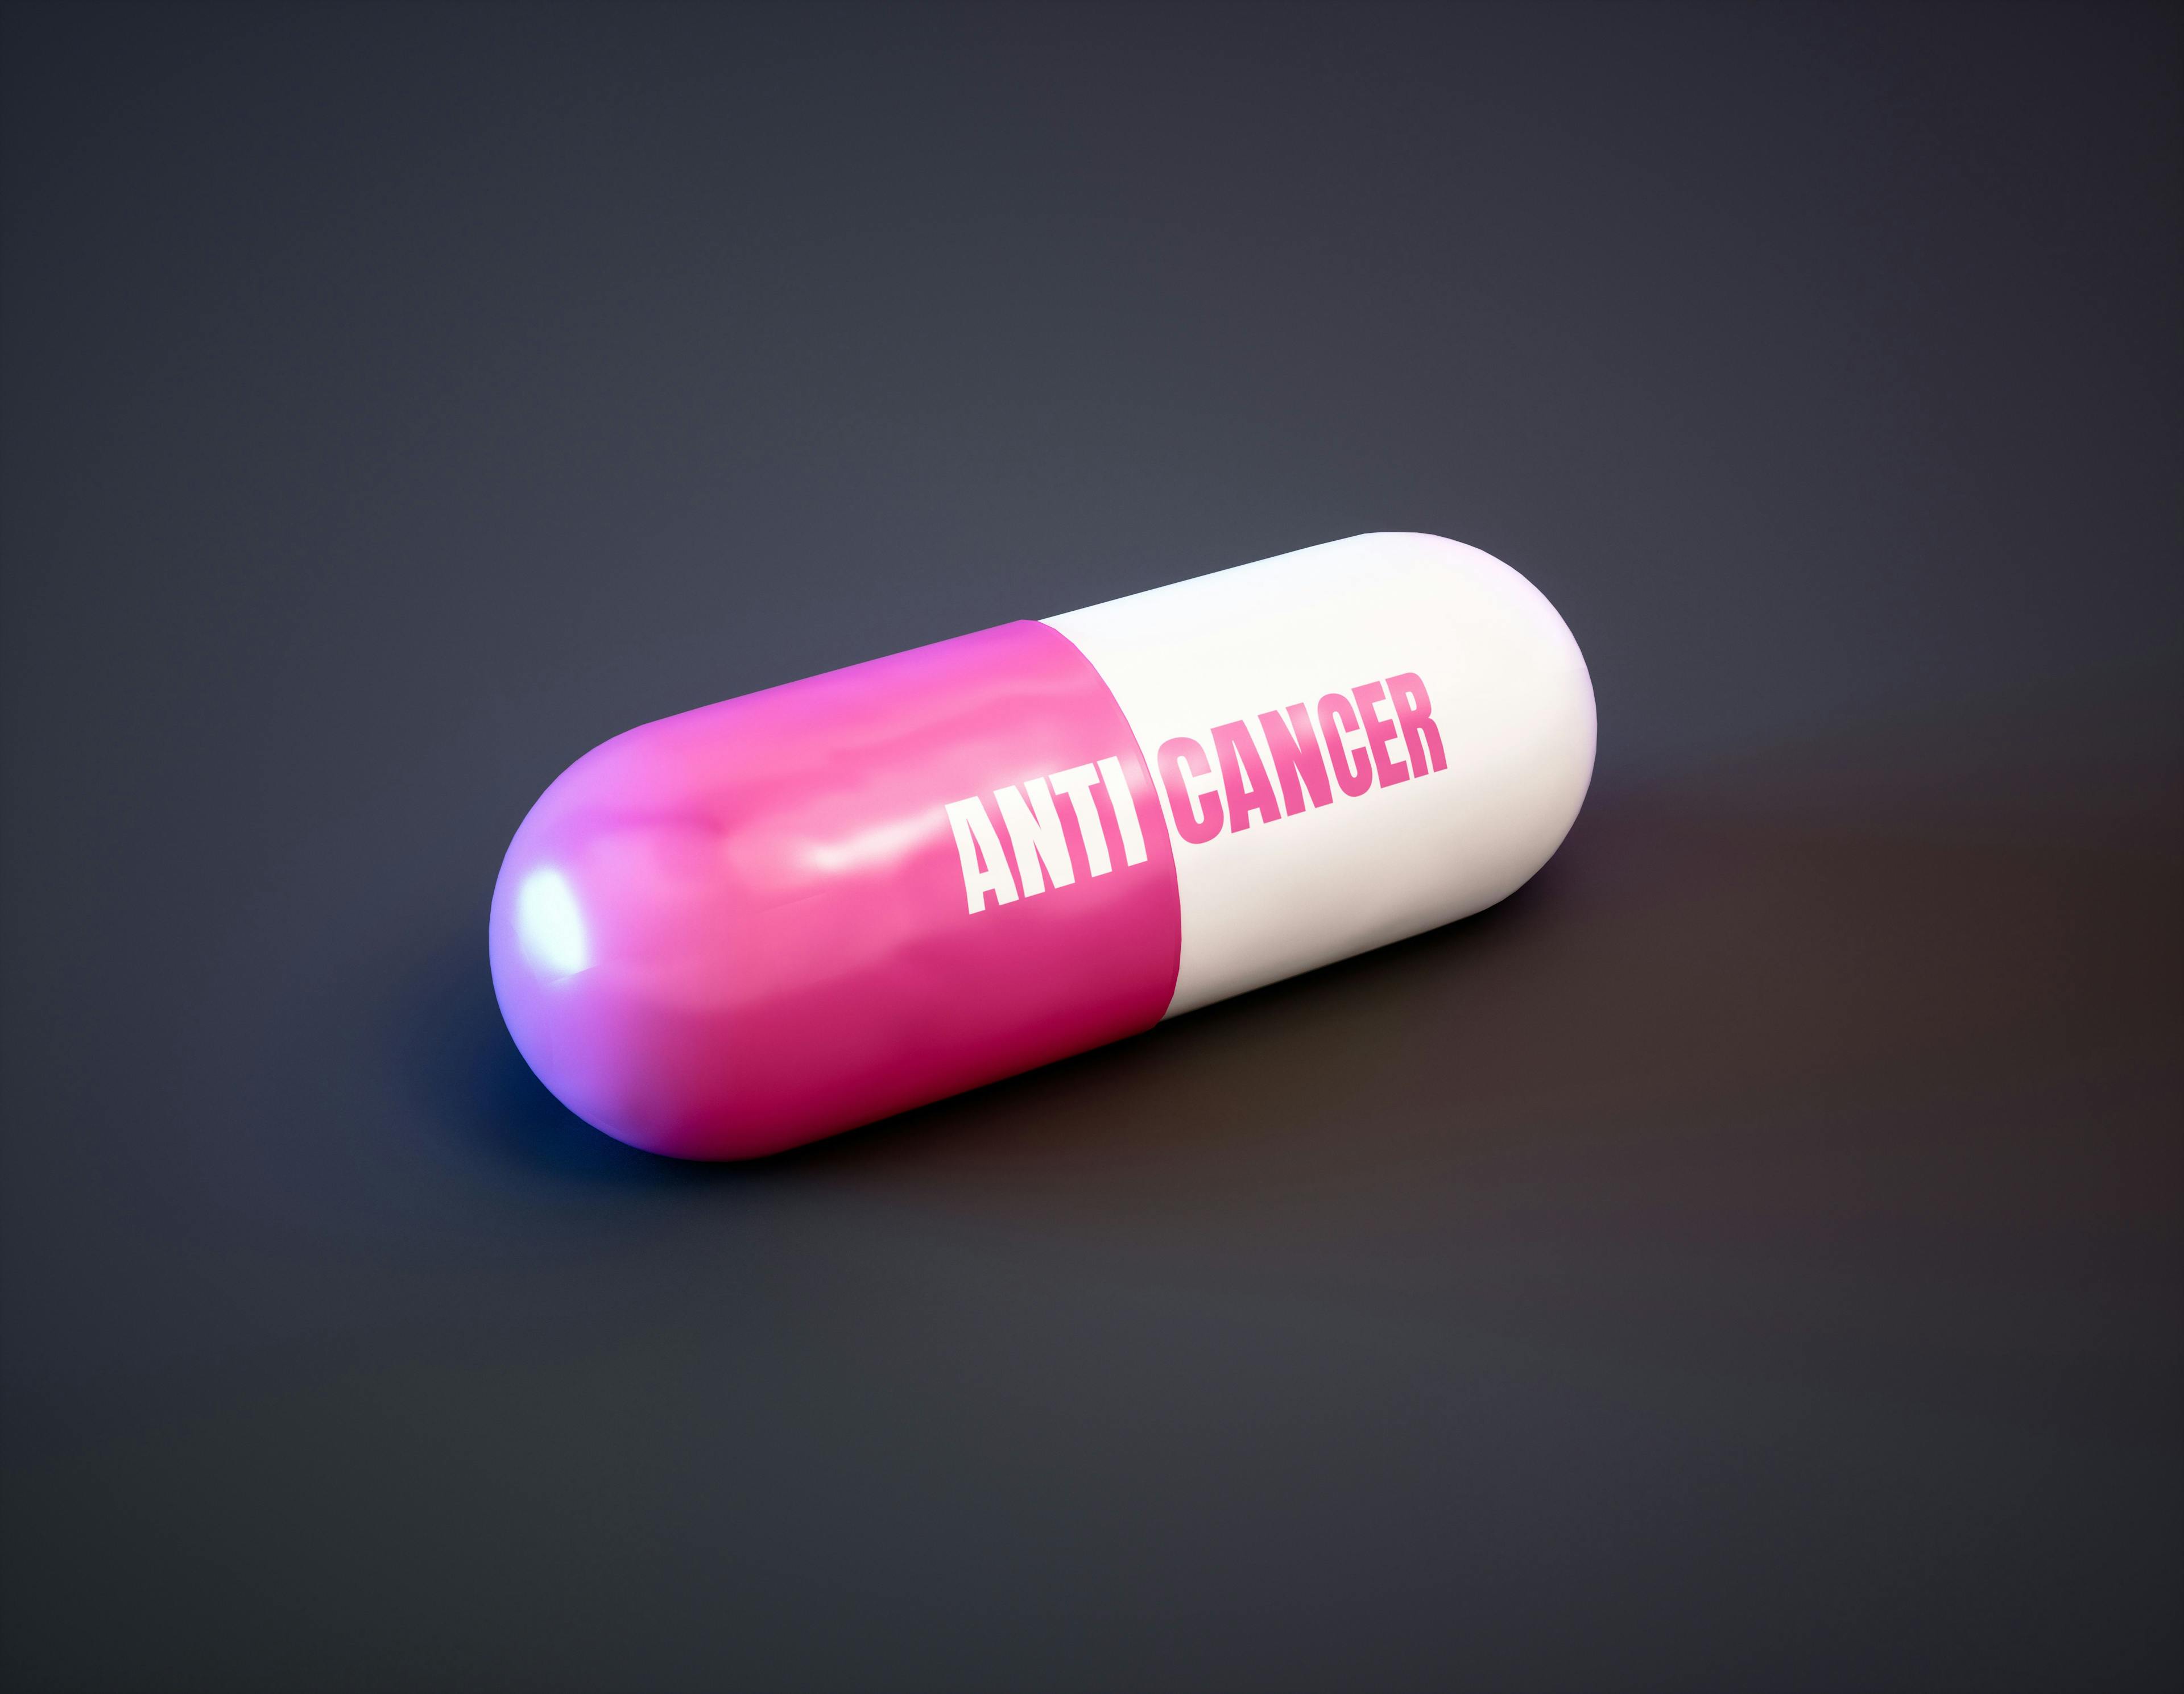 Cancer therapy drugs concept. Pink pill with text on black background. 3d illustration. | Image Credit: © malp - stock.adobe.com